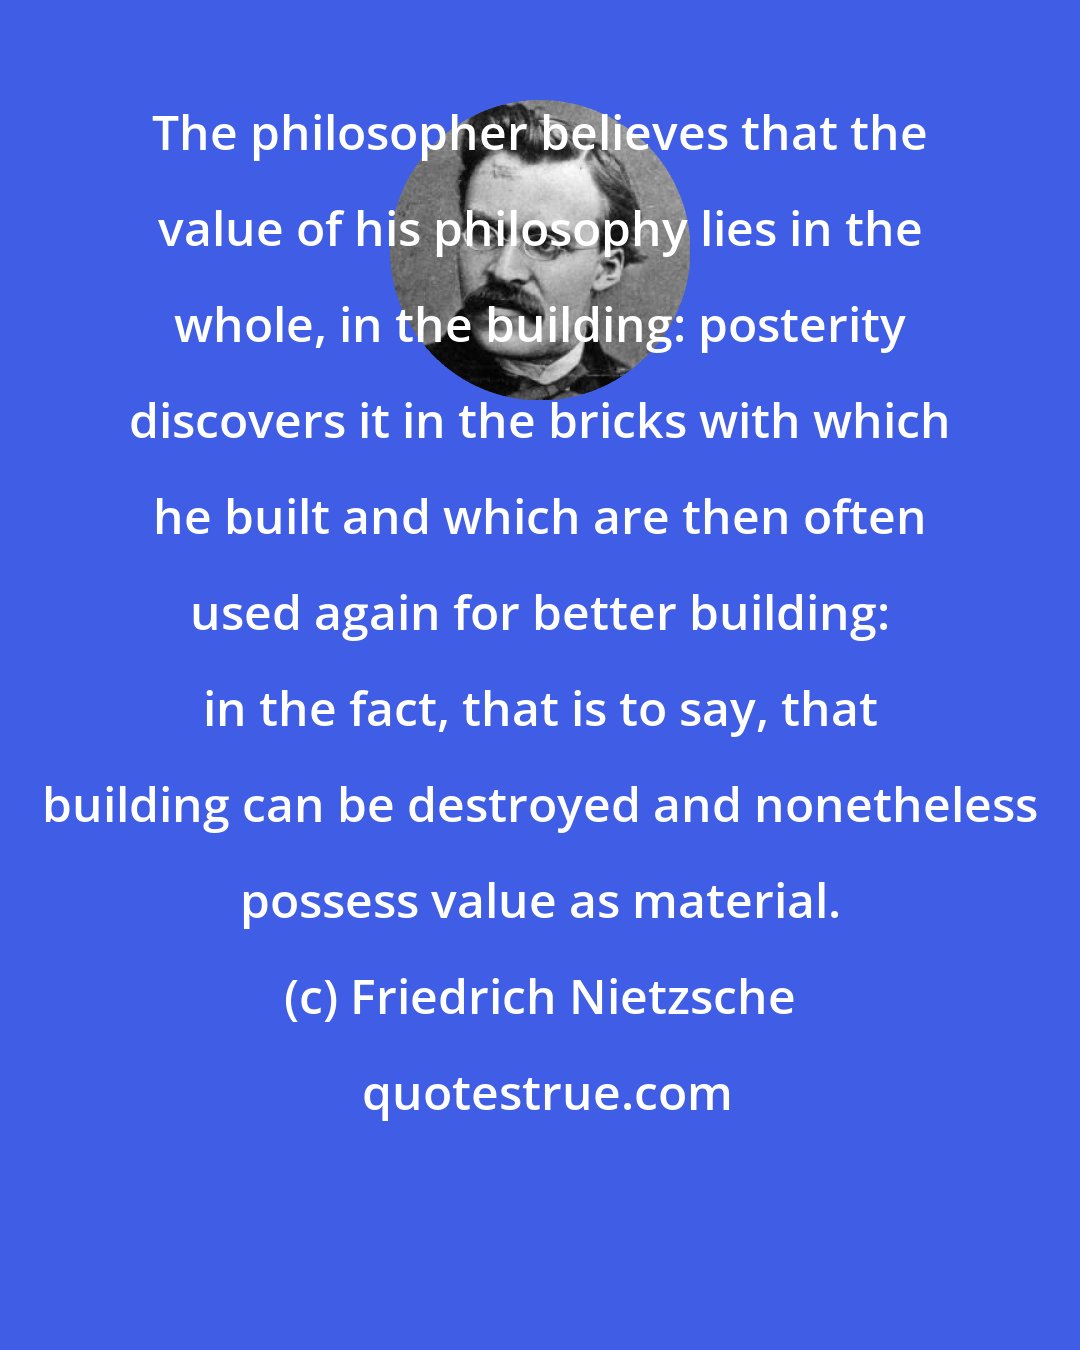 Friedrich Nietzsche: The philosopher believes that the value of his philosophy lies in the whole, in the building: posterity discovers it in the bricks with which he built and which are then often used again for better building: in the fact, that is to say, that building can be destroyed and nonetheless possess value as material.